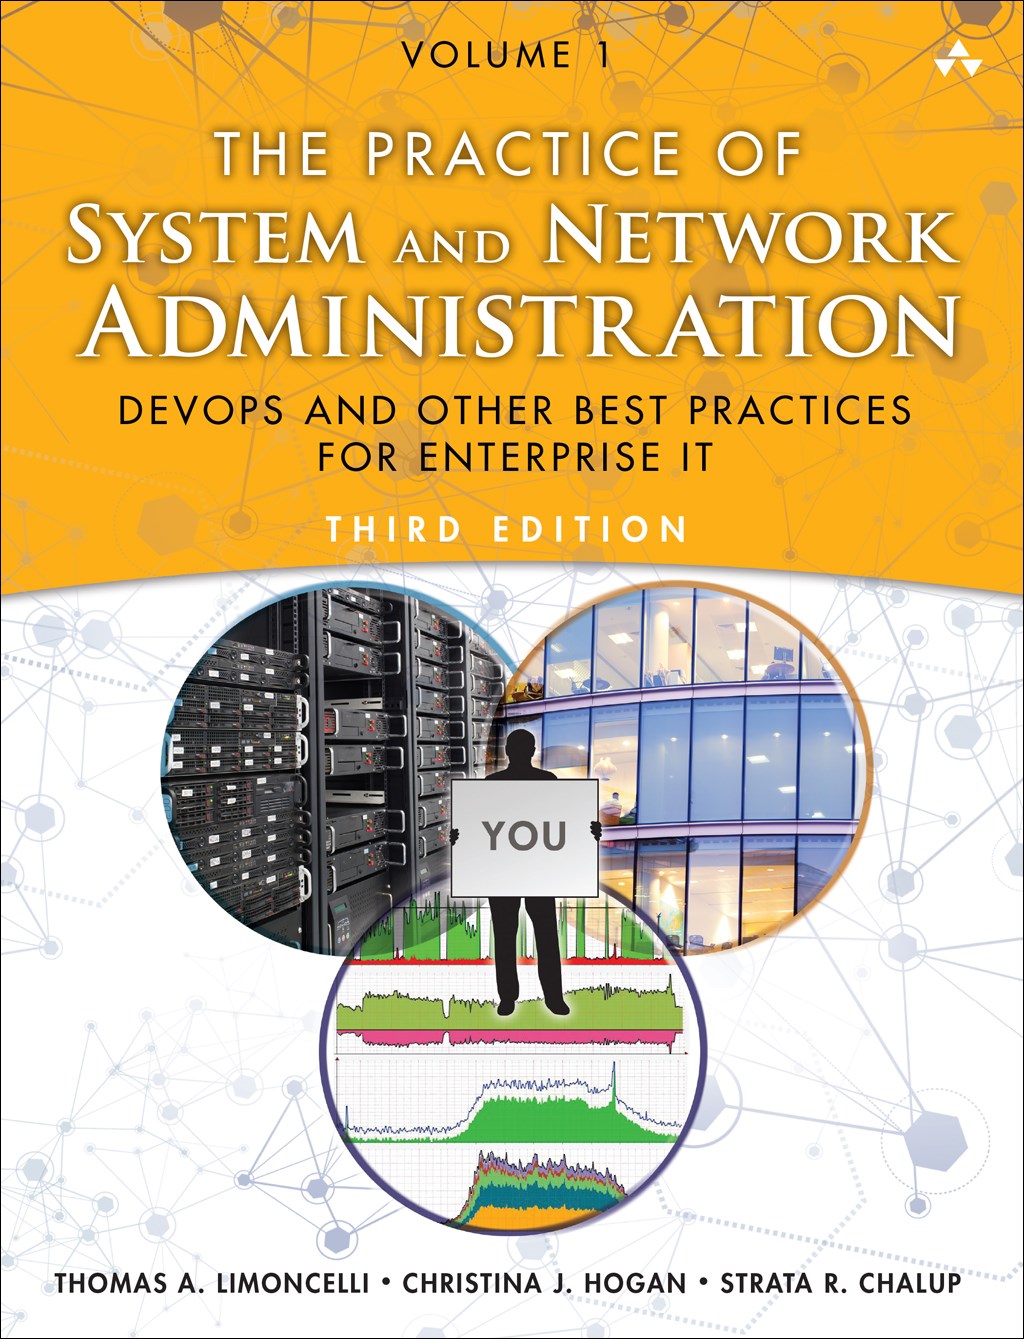 Practice of System and Network Administration, The: Volume 1: DevOps and other Best Practices for Enterprise IT, 3rd Edition